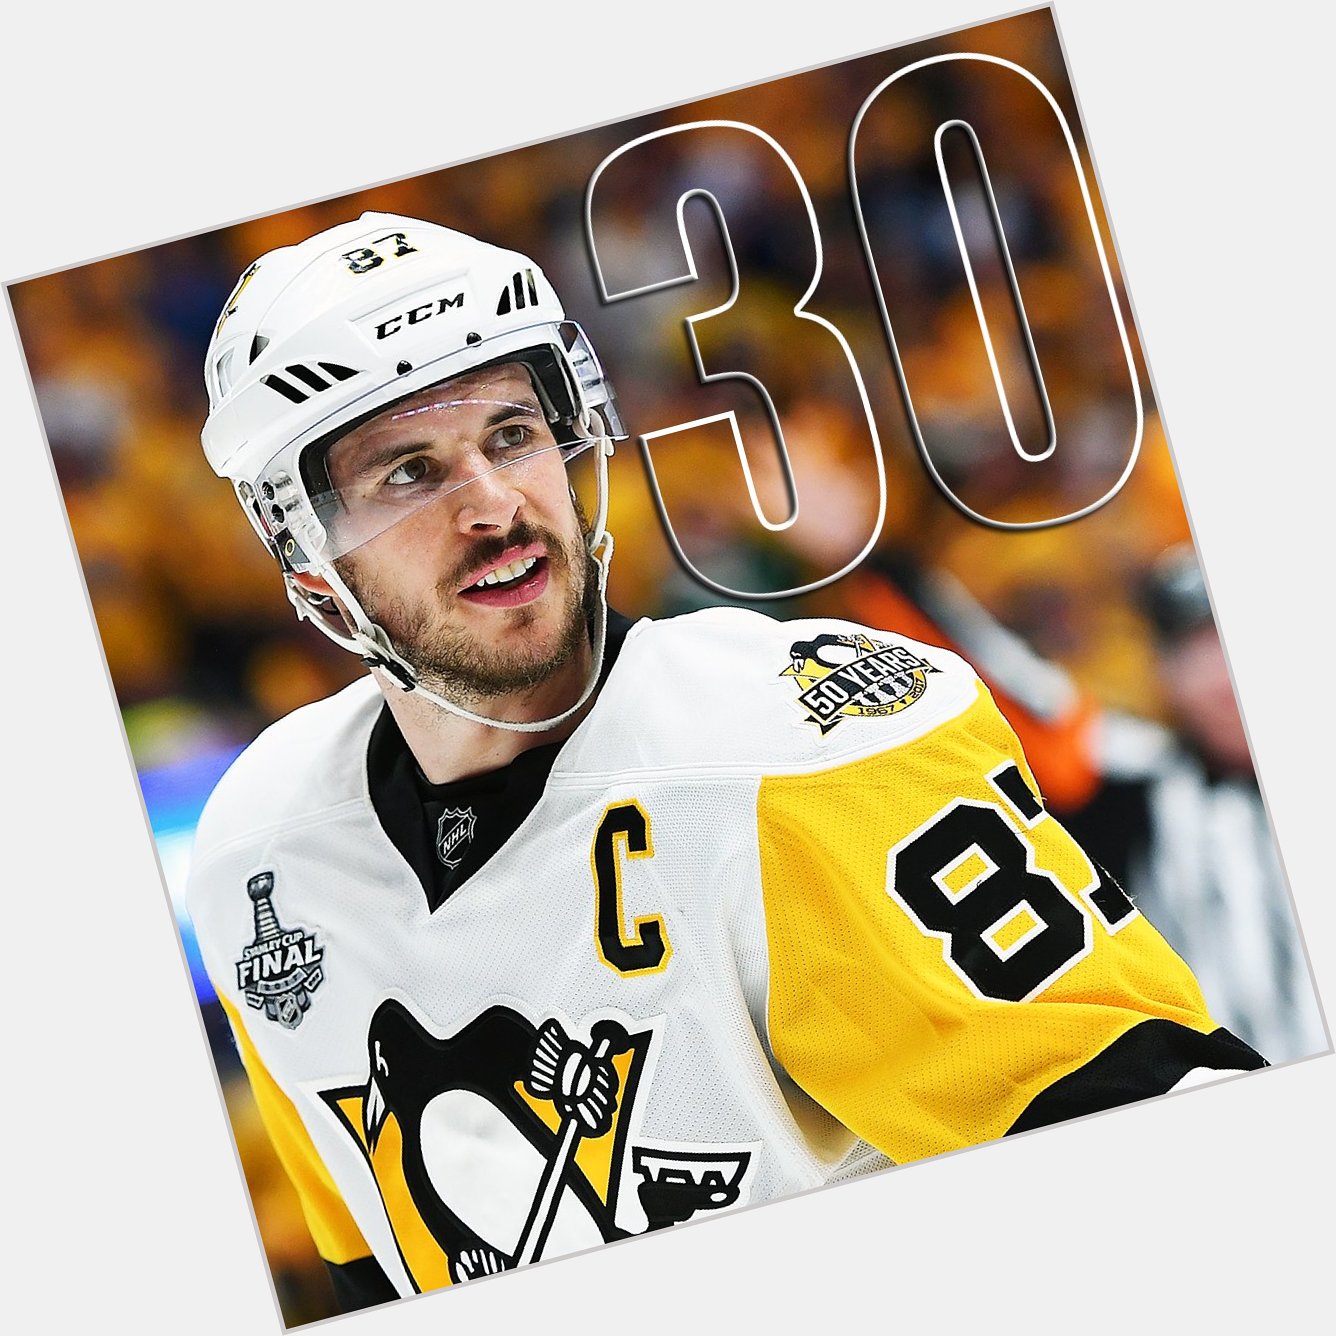 Sidney Crosby reaches another milestone today. 

Happy 30th birthday, Sid! 